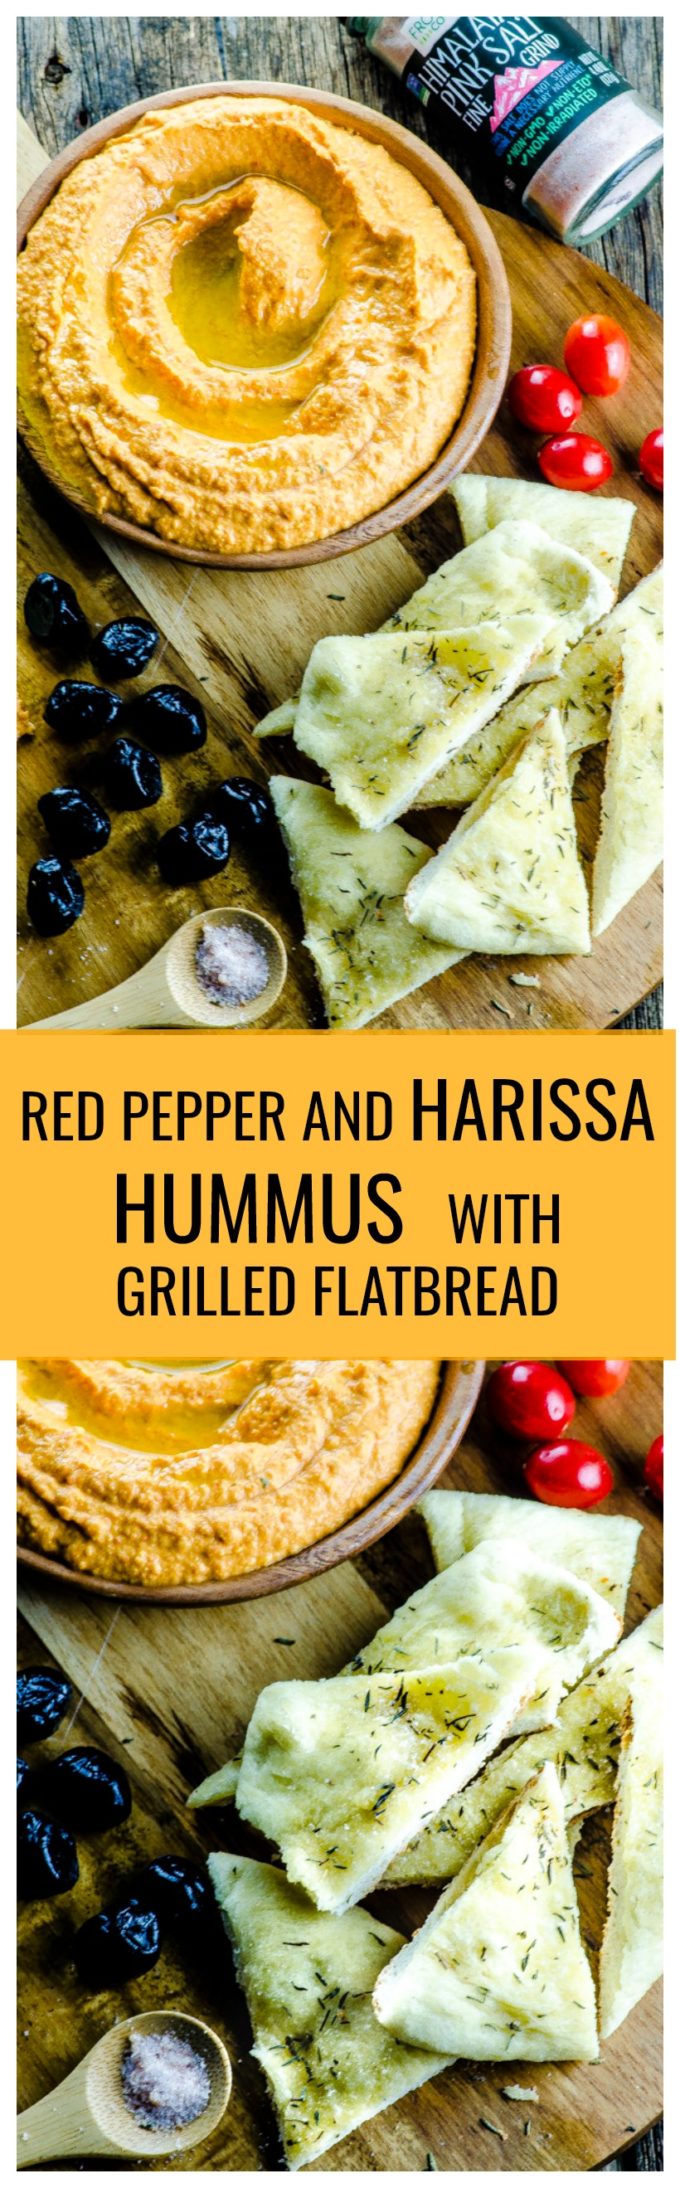 Get ready to entertain this summer with this Red Pepper and Harissa Hummus with Grilled Flatbread ! Brushed with olive oil, seasoned with Fine Grind Pink Himalayan Salt and a touch of thyme and grilled to perfection, this flatbread is a delicious "transportation device" for the flavored packed hummus.